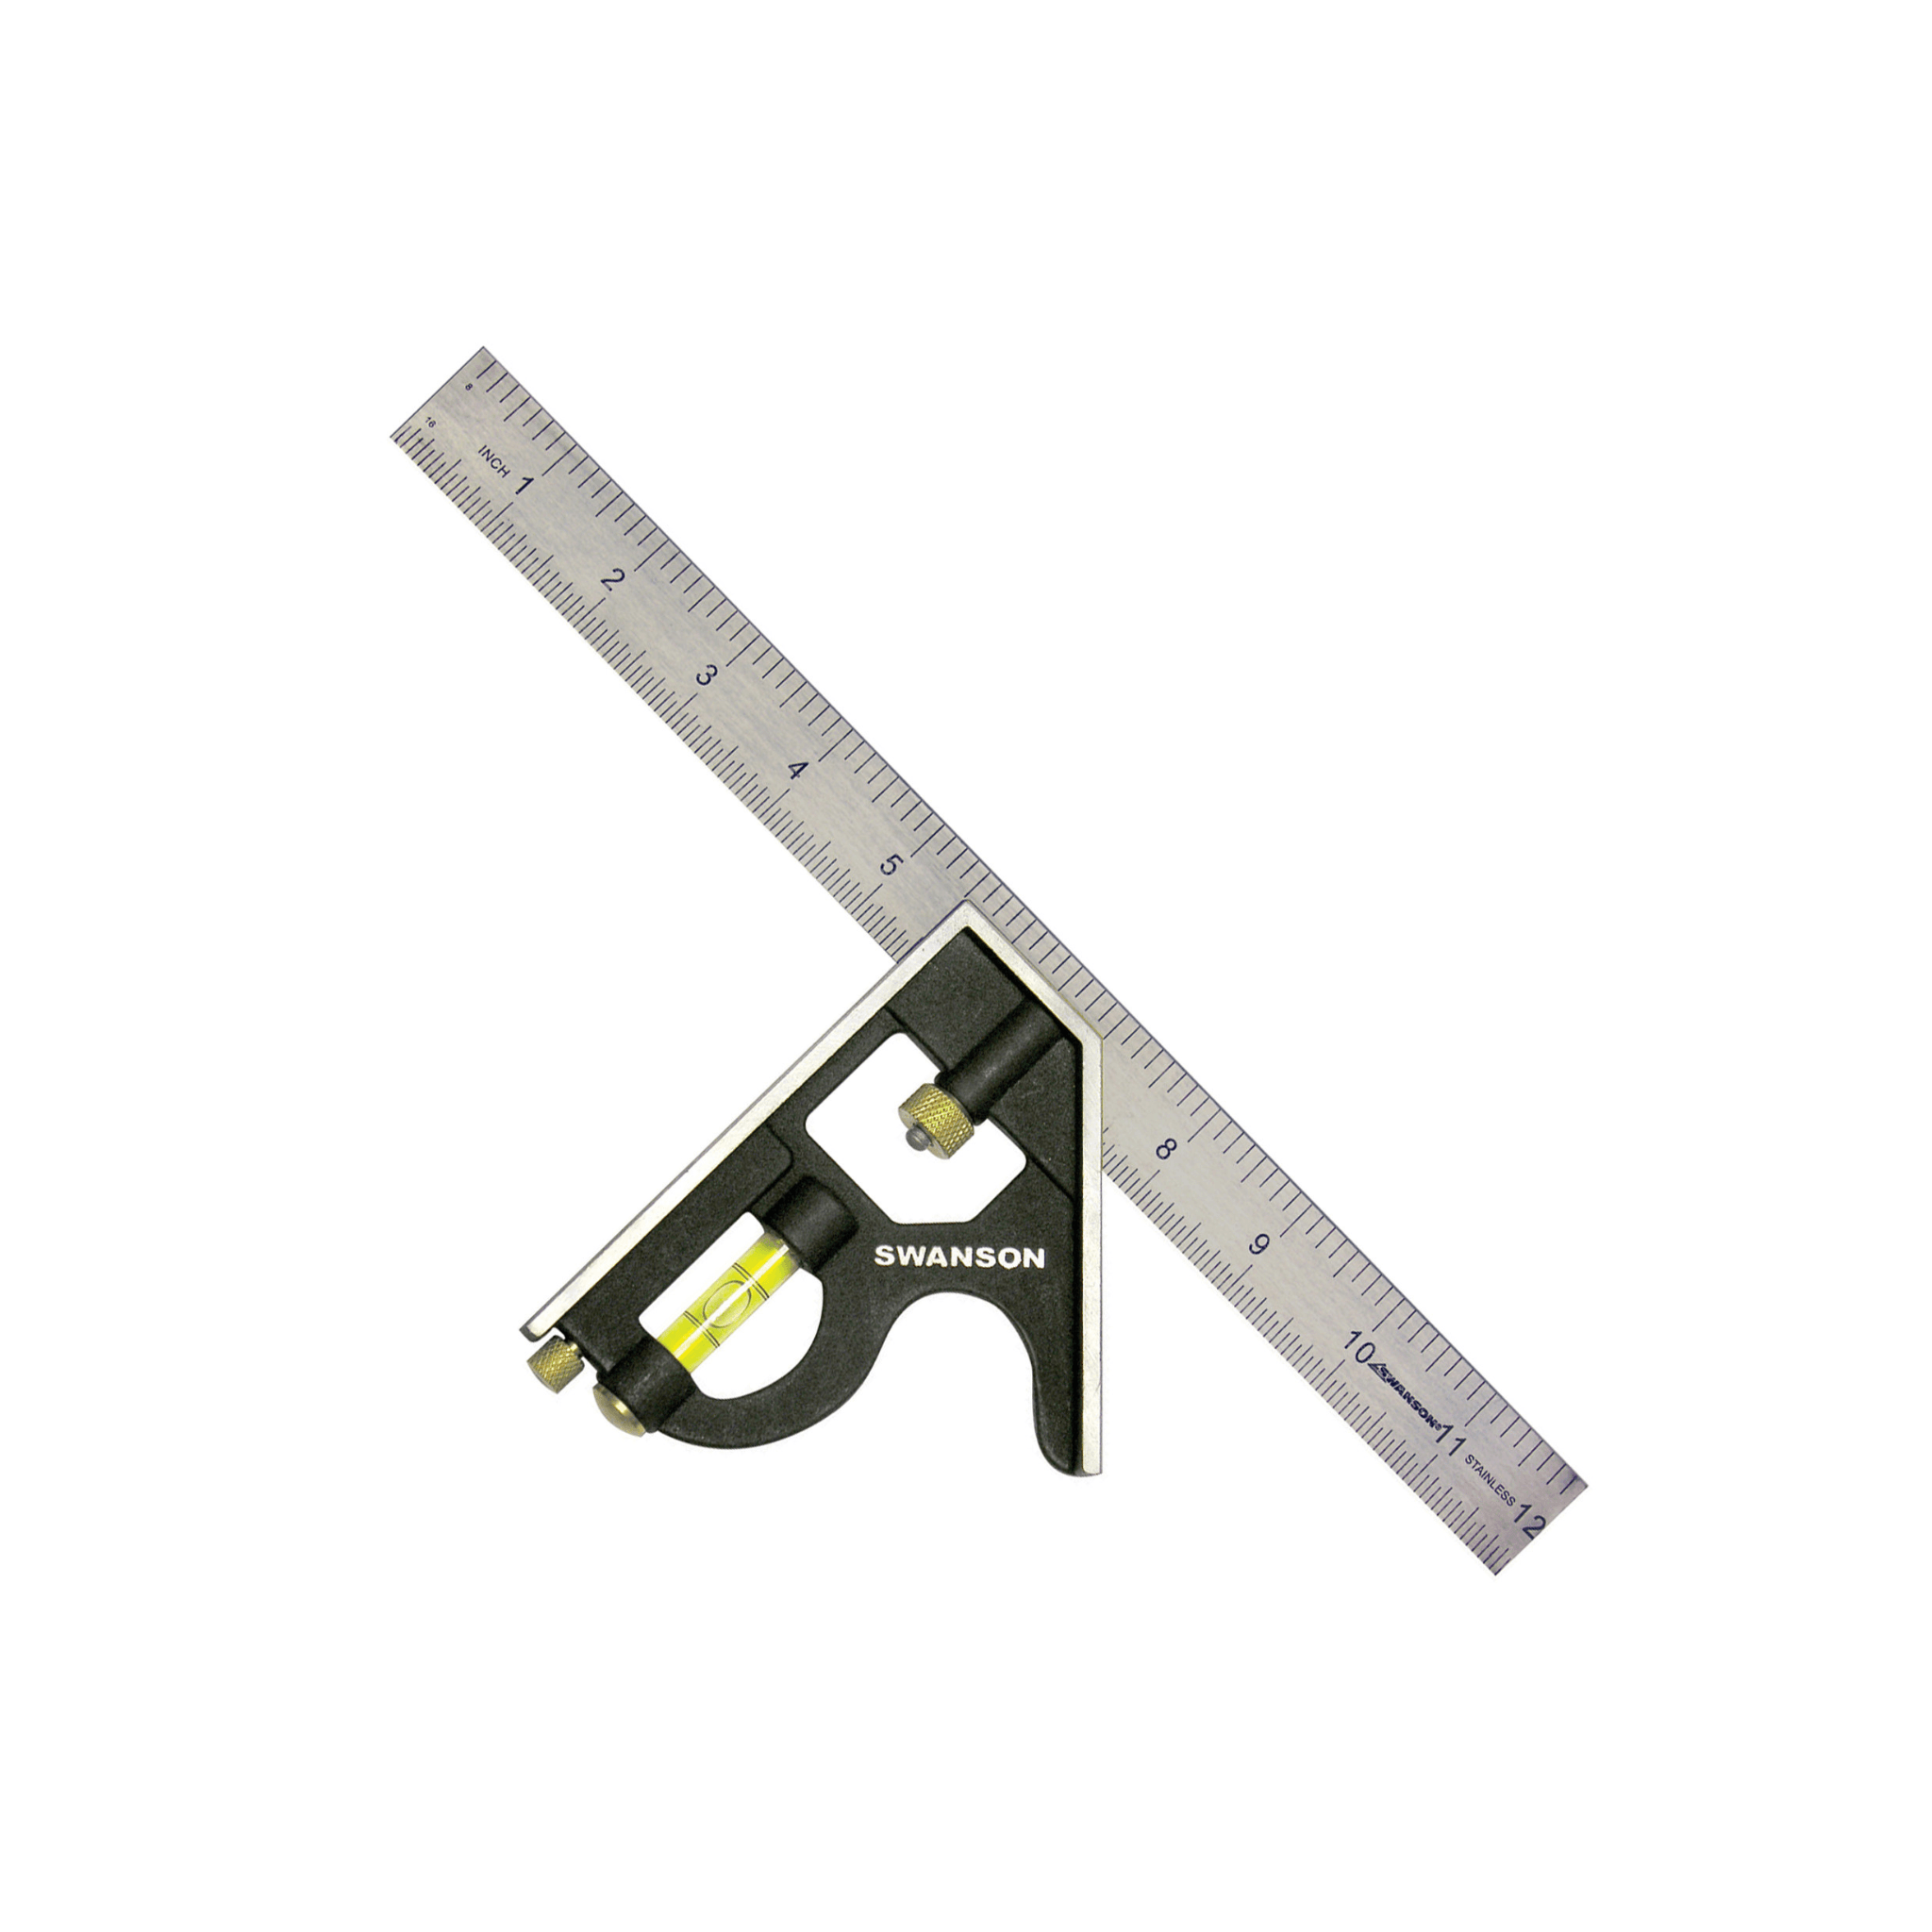 Swanson TC132 12 in. Combination Square - Direct Stone Tool Supply, Inc